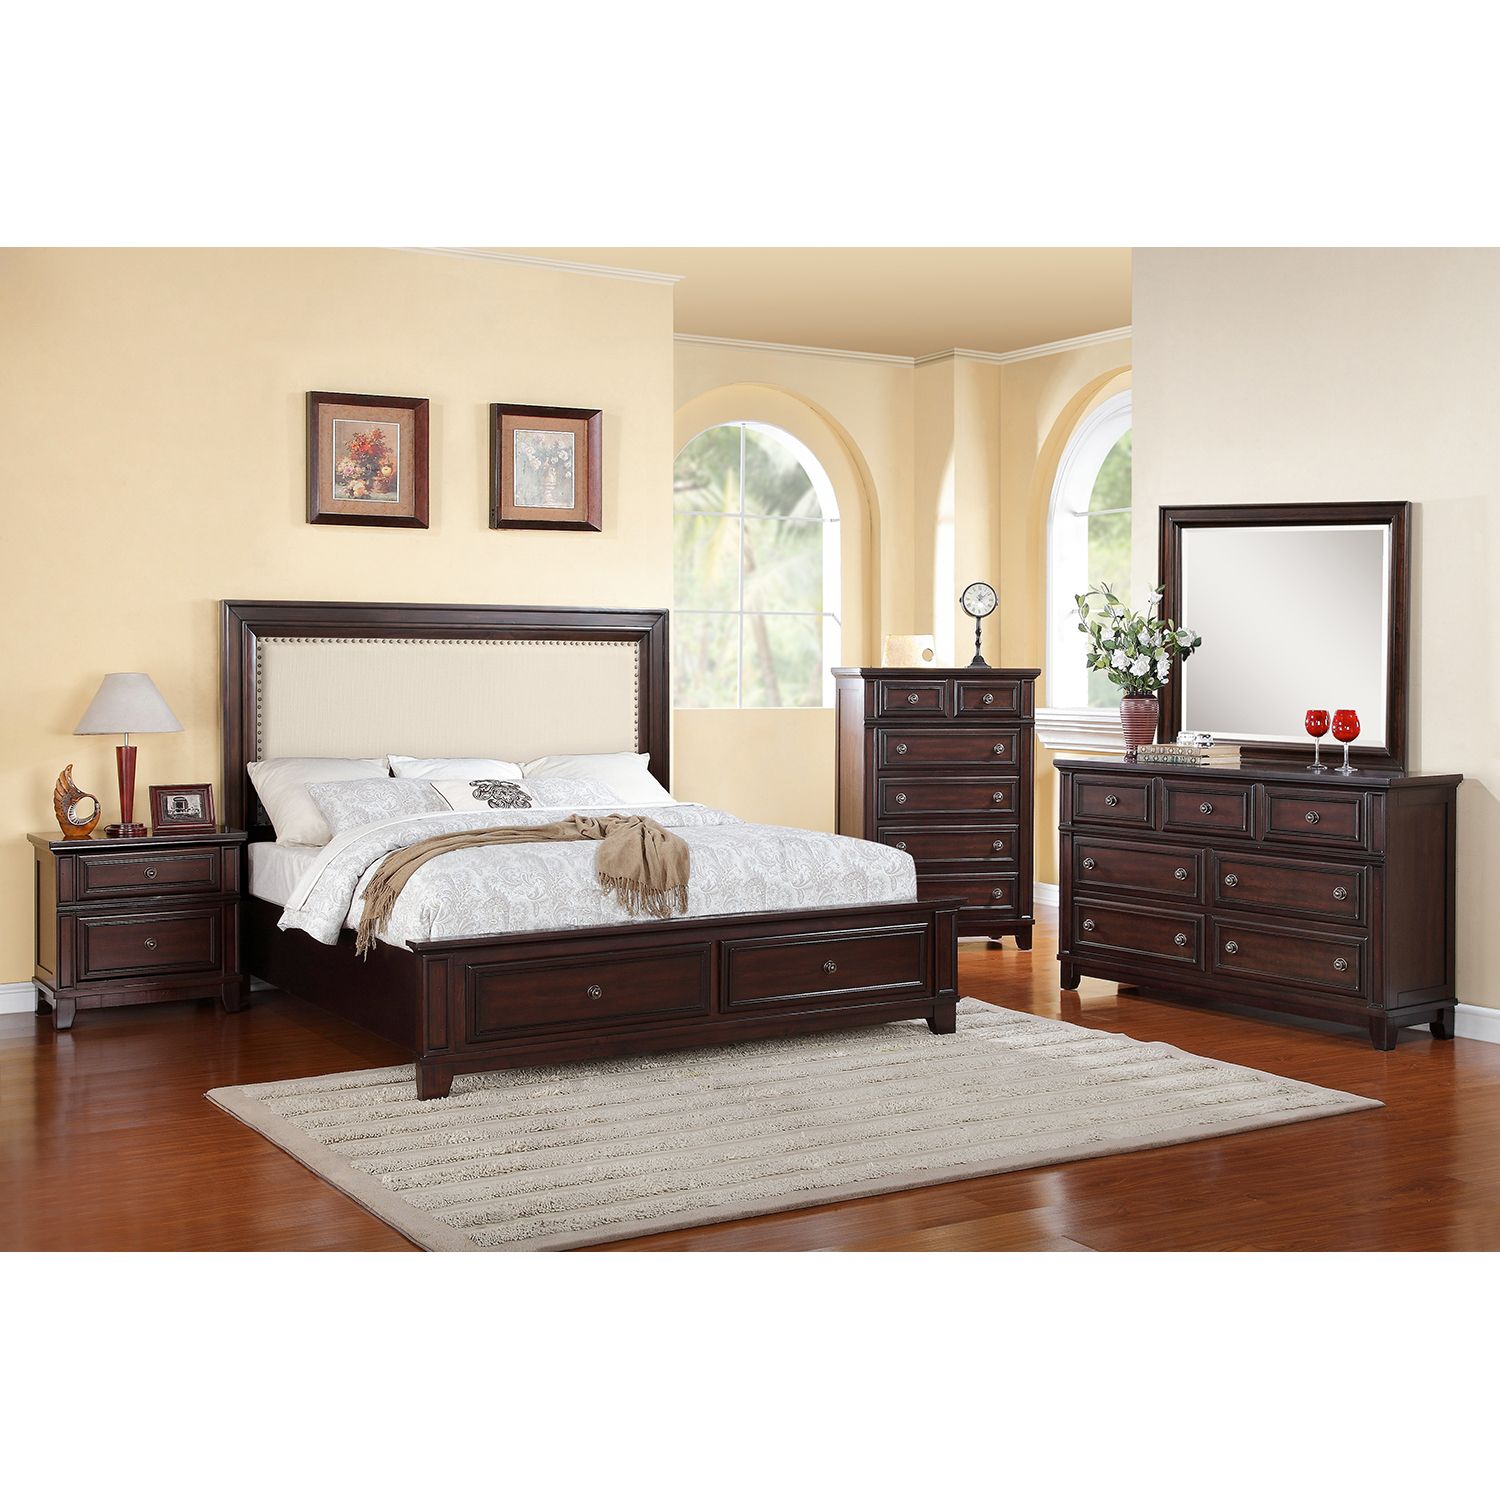 Harland Bed with Upholstered Headboard 5 Piece Bedroom Set